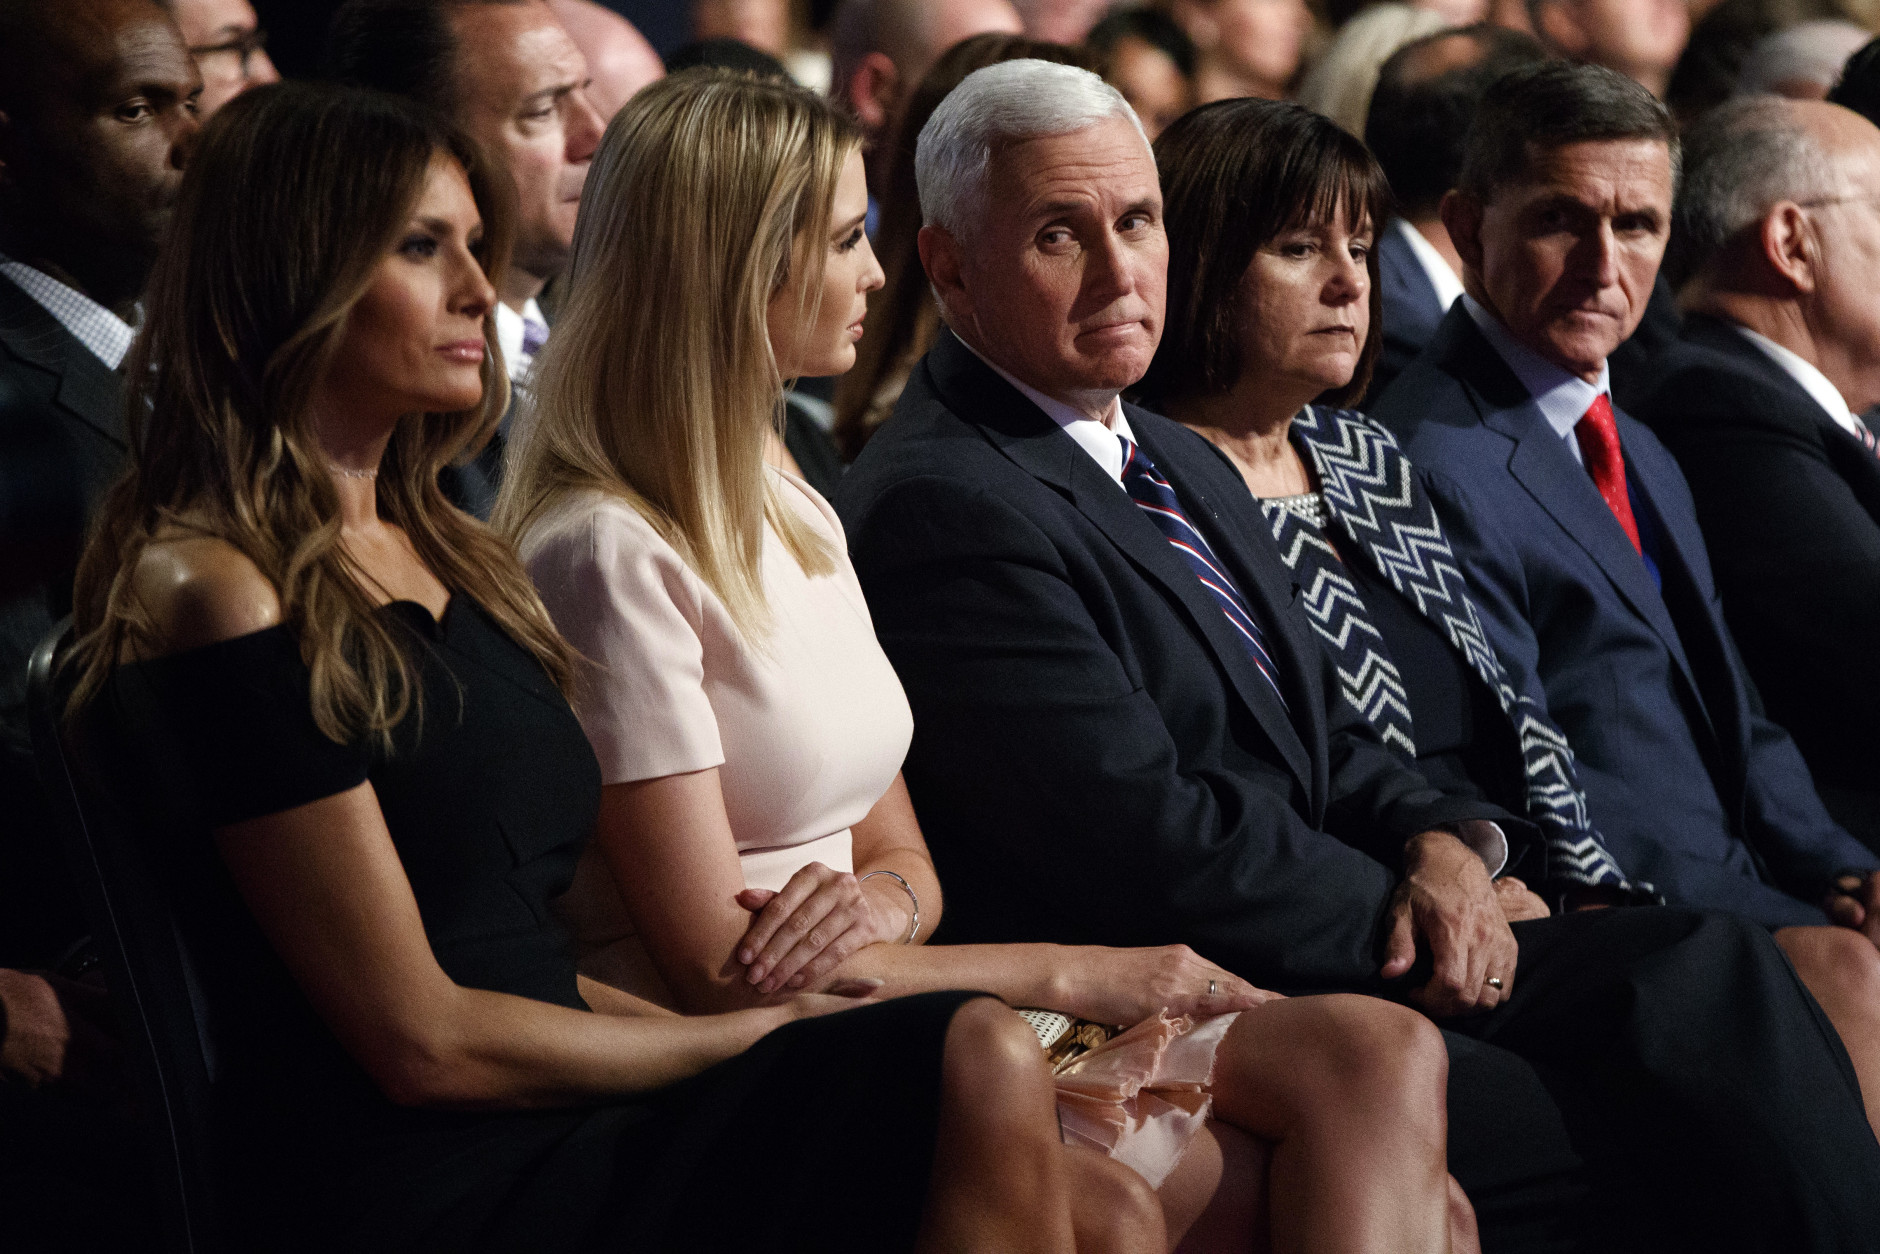 Republican vice presidential candidate Indiana Gov. Mike Pence, center, waits for the start of the first presidential between Republican presidential candidate Donald Trump and Democratic presidential candidate Hillary Clinton at Hofstra University, Monday, Sept. 26, 2016, in Hempstead, N.Y. From left, Melania Trump, Ivanka Trump, Pence, Karen Pence, and retired Gen. Michael Flynn. (AP Photo/ Evan Vucci)